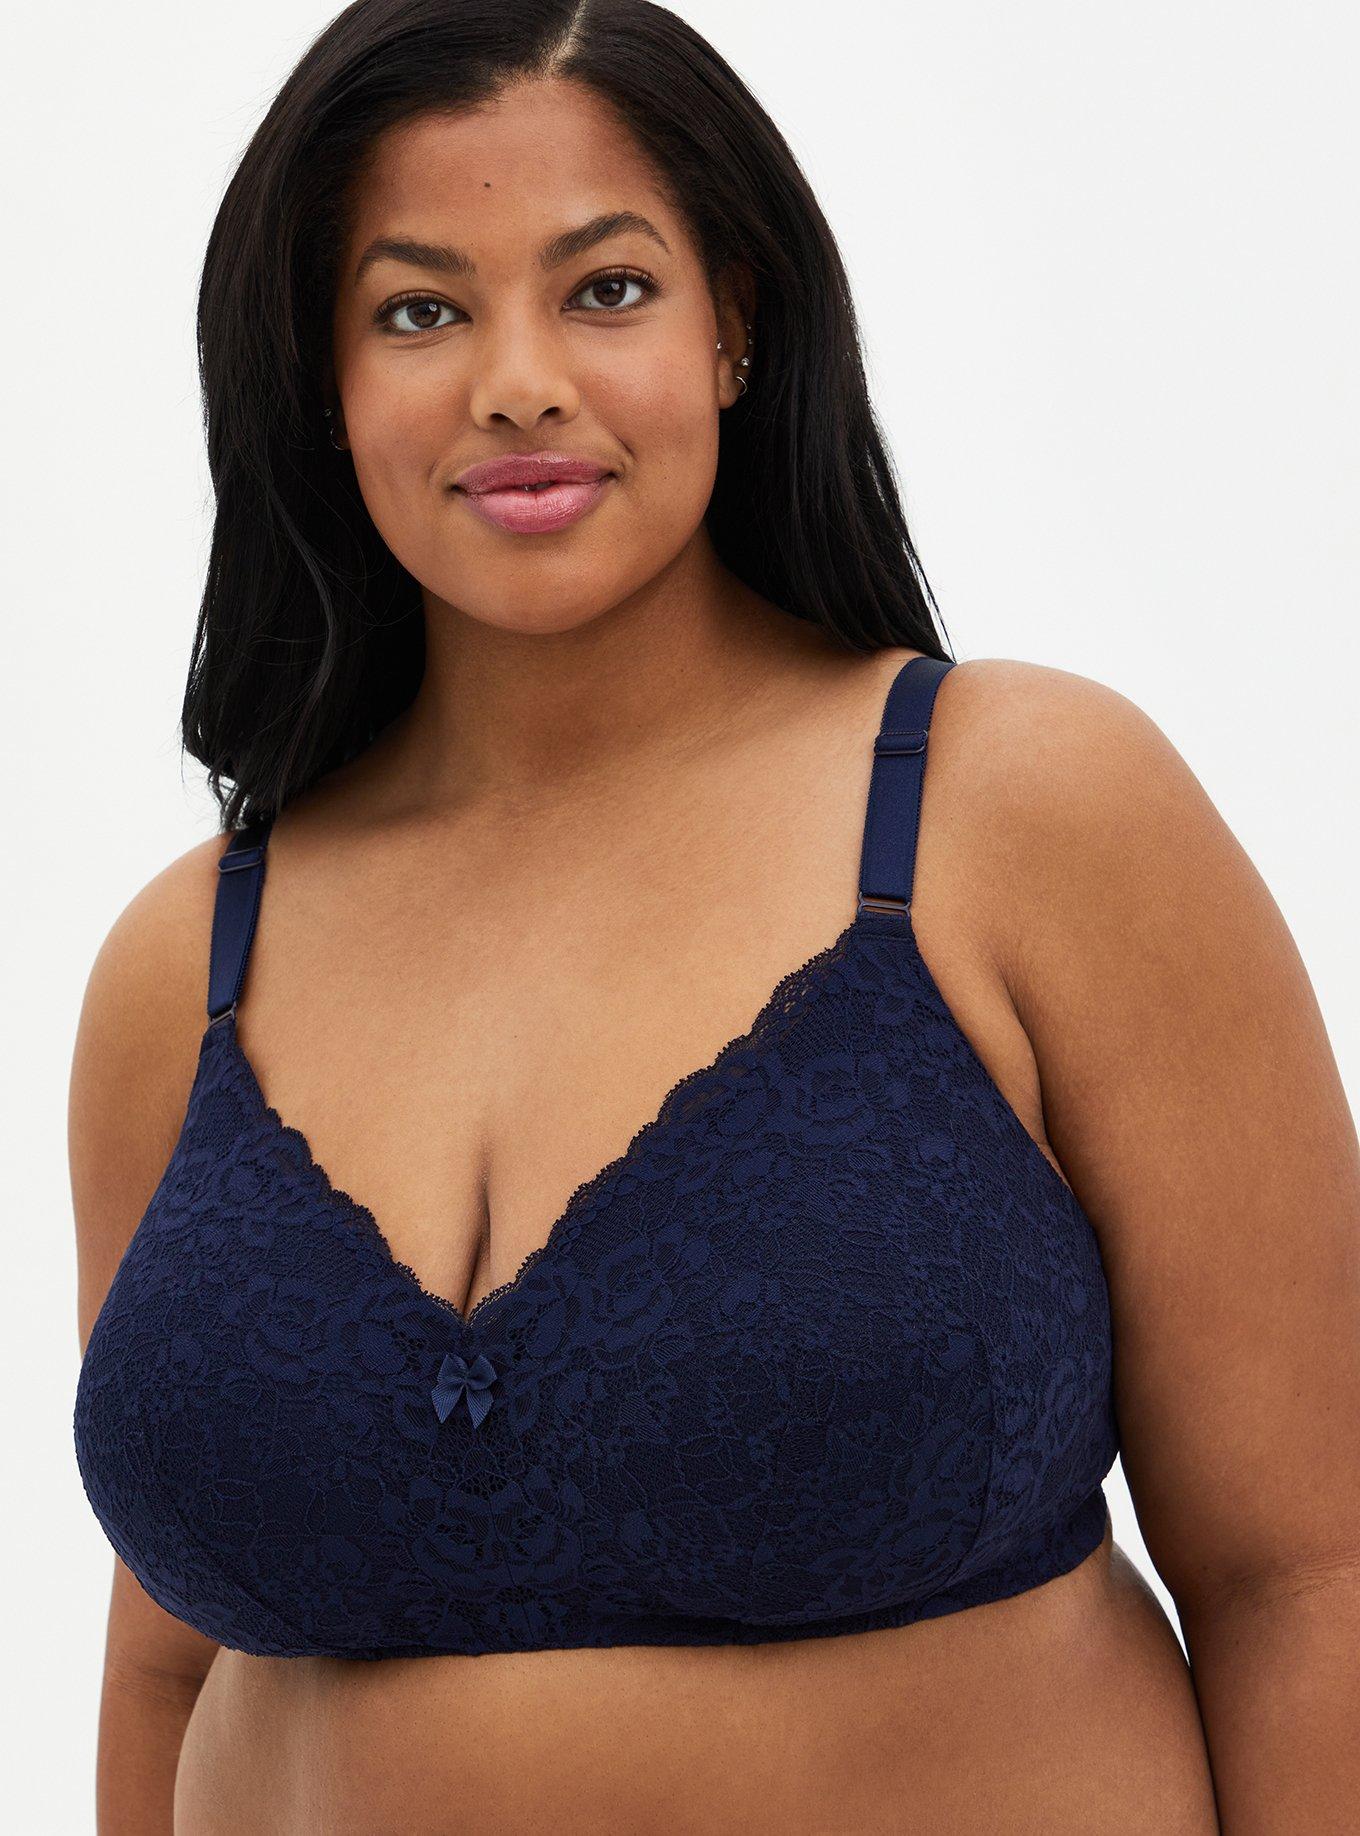 I'm 5'1 and a size large with 38DD boobs - I did an  fall haul, my  budget-friendly dress is a curvy girl's dream